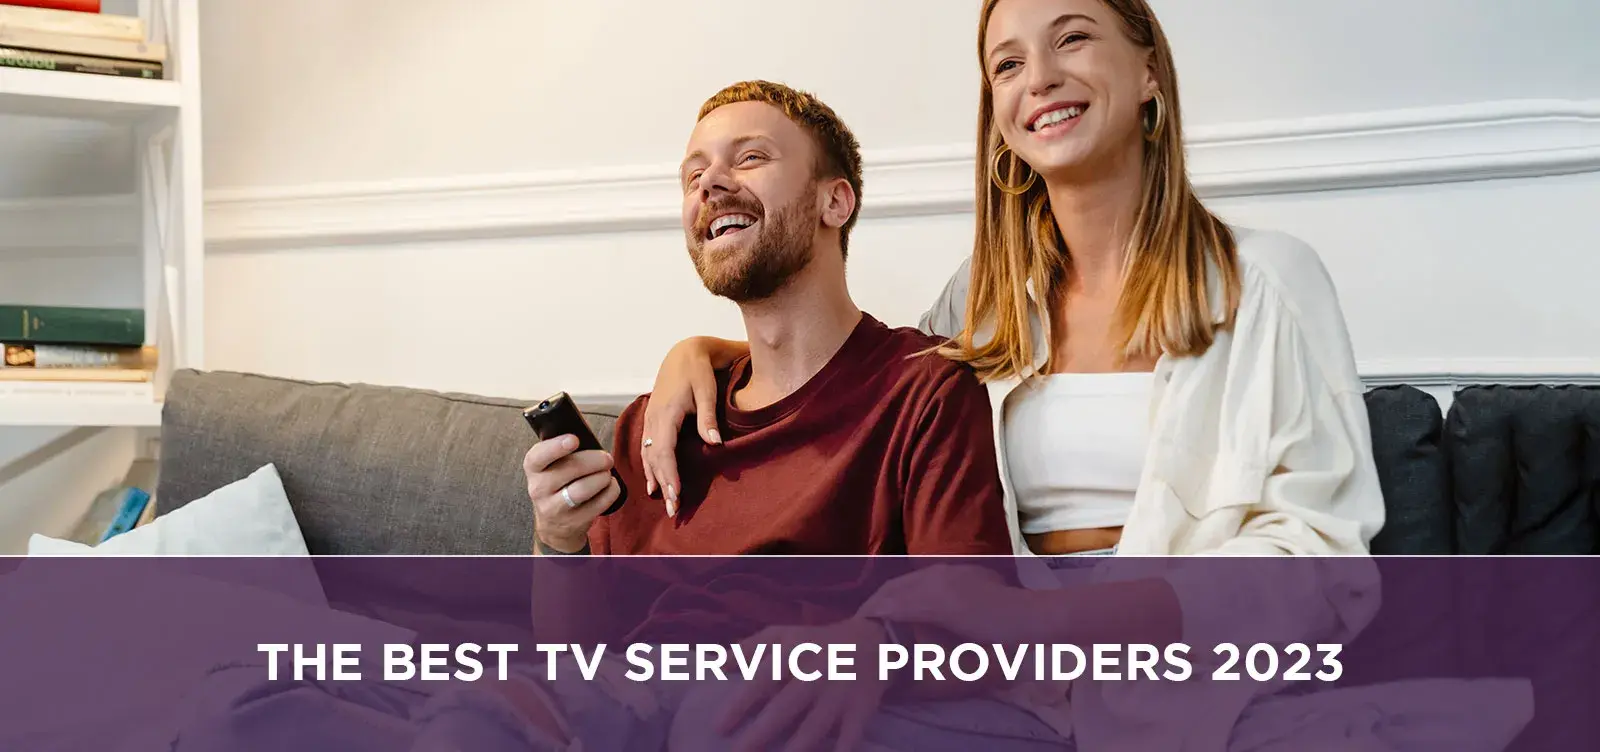 The Best TV service providers 2023